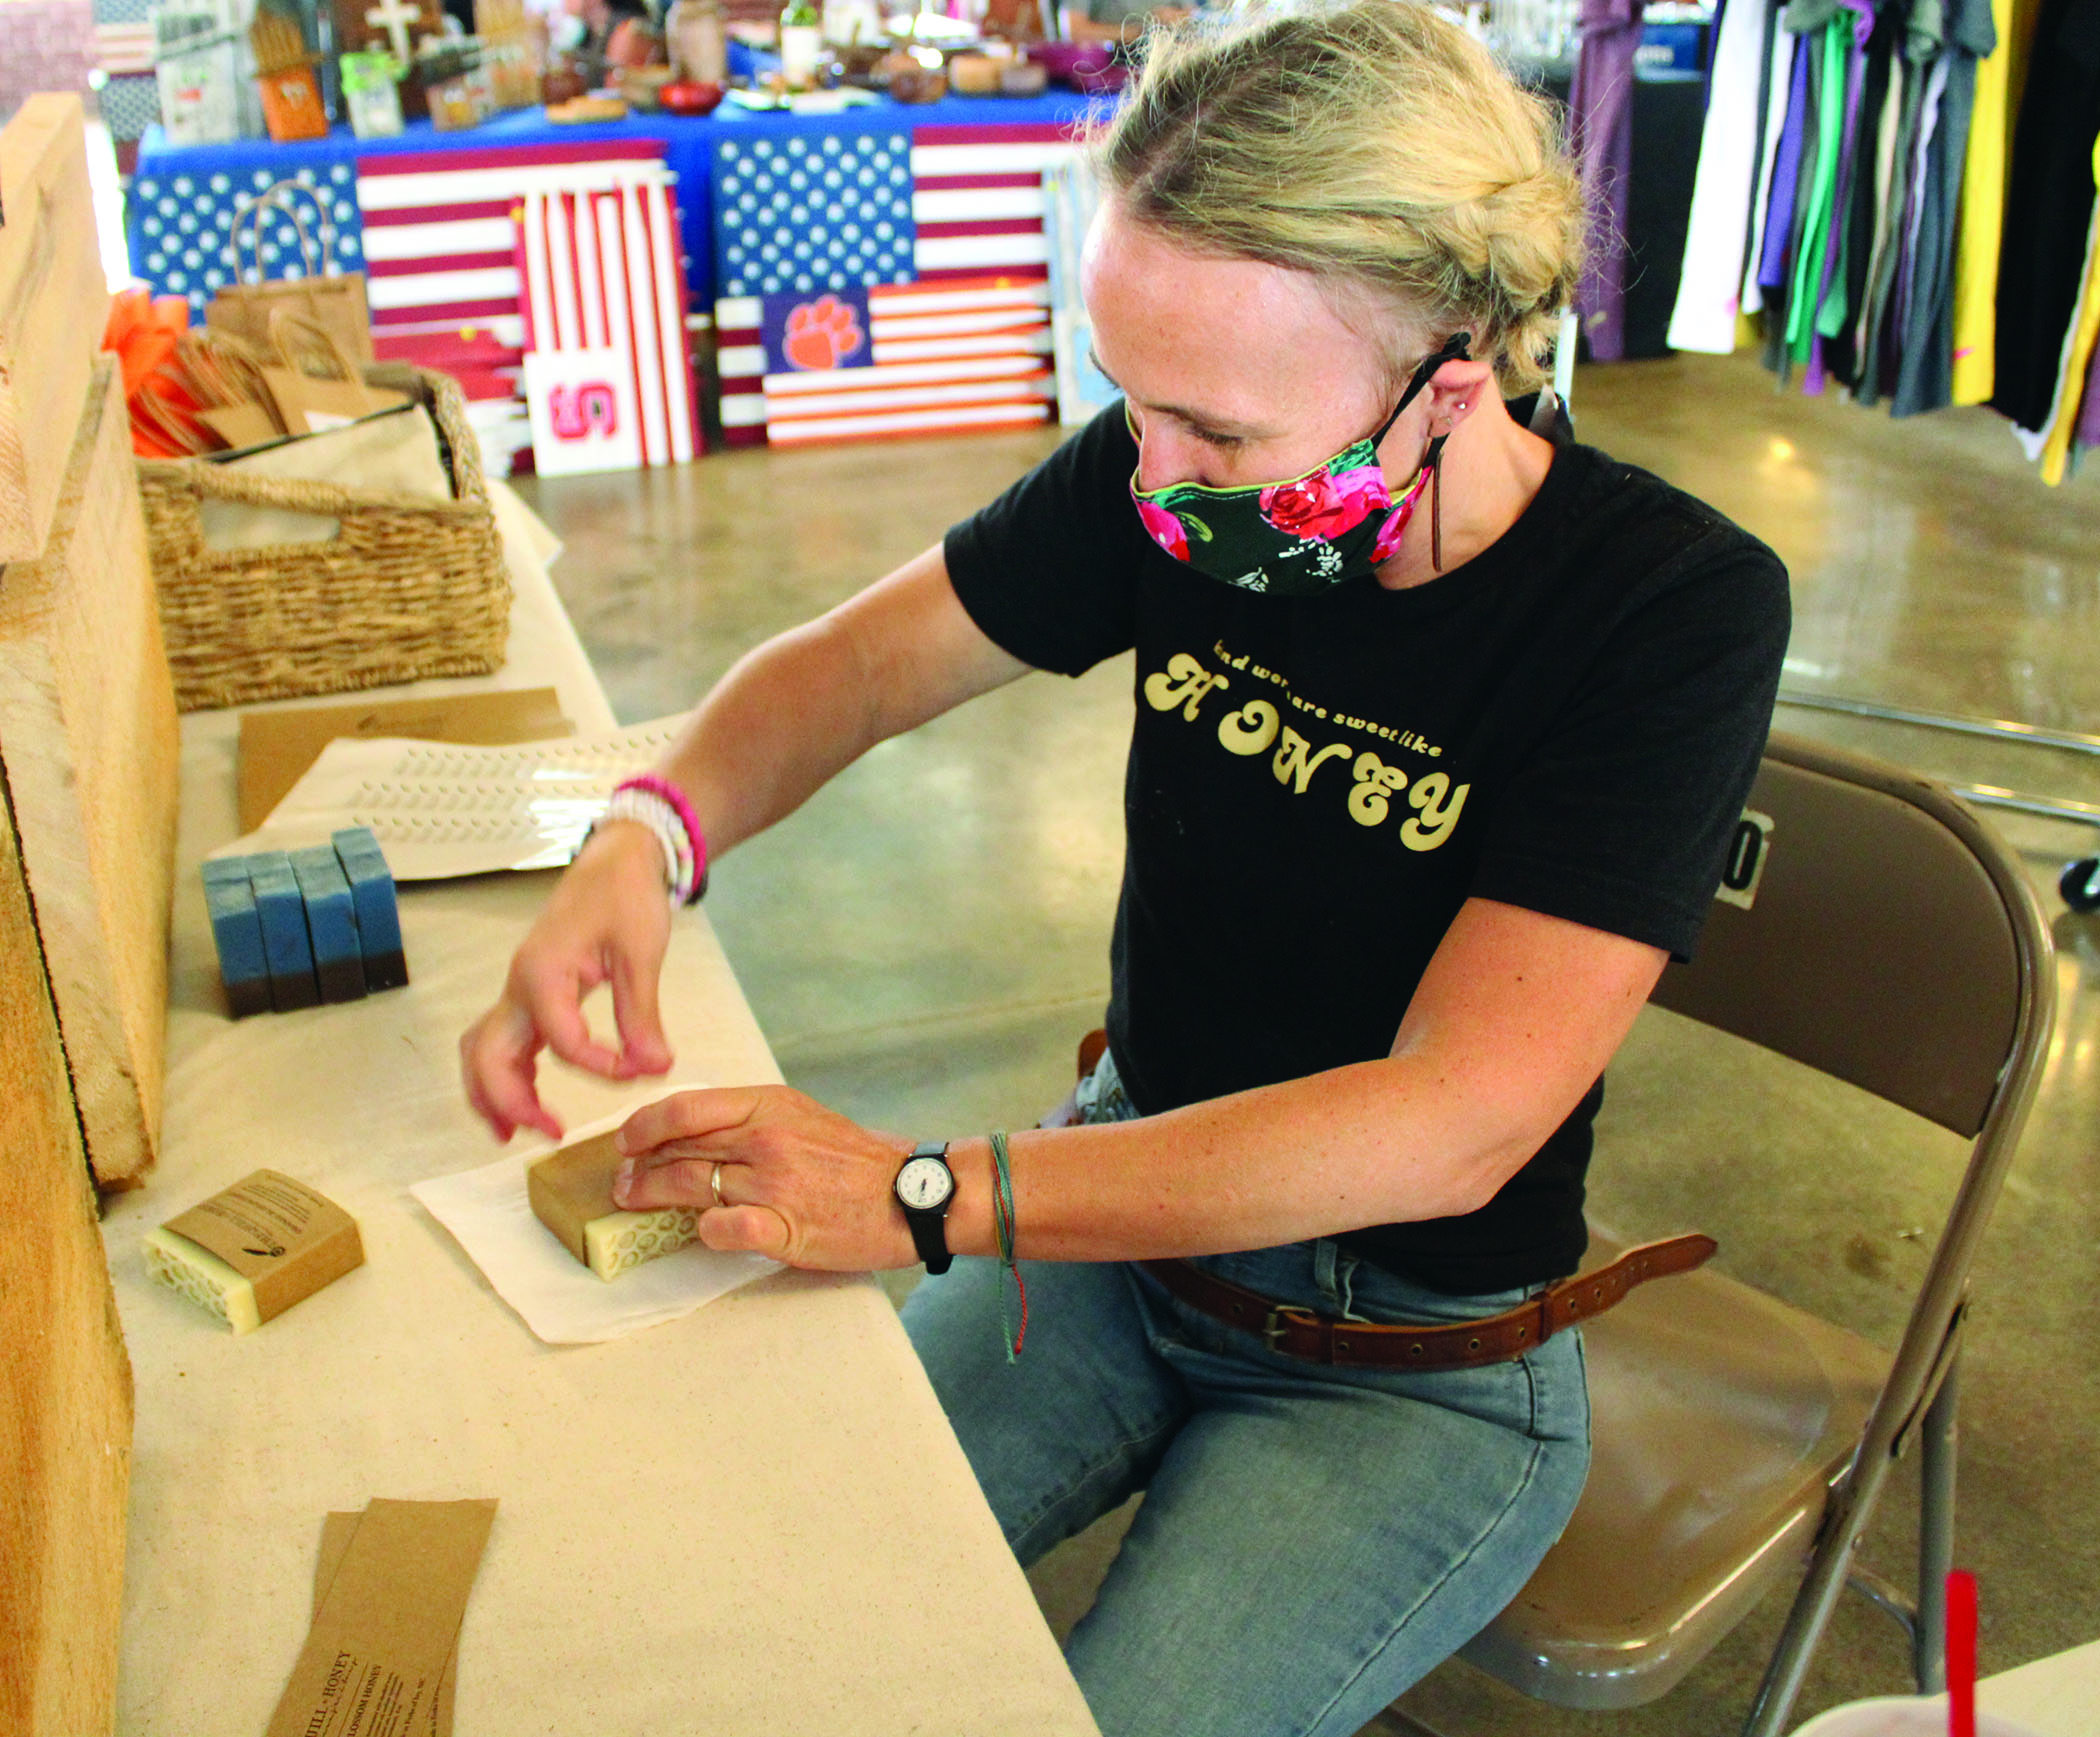 Kendall Chandler, owner and developer of The Quill and Honey, wraps up soap bars to prepare them for sale Friday, July 31 during the Rock Hound Craft and Vintage Market at Cross Street Commerce Center. Chandler came to the show from Forks of Ivy. (MNJ photo/Cory Spiers)